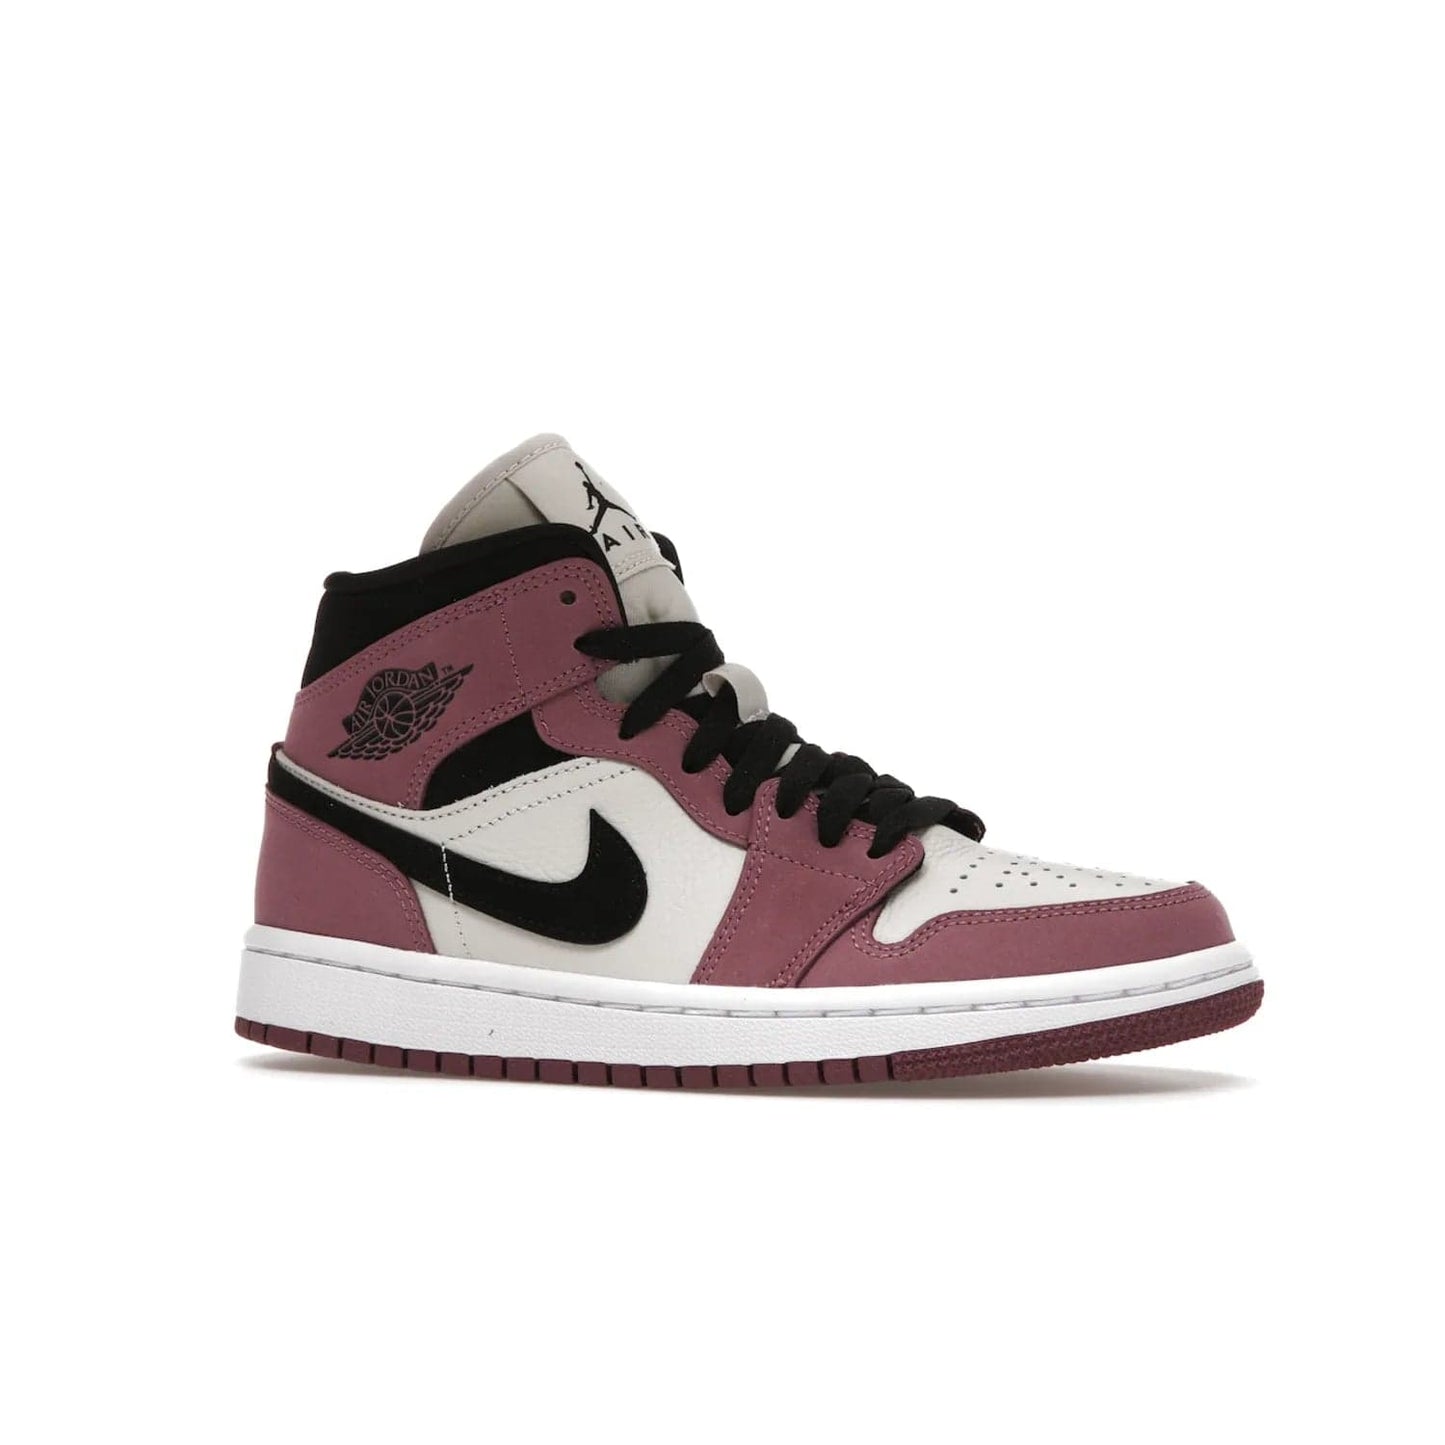 Jordan 1 Mid SE Light Mulberry (Women's) - Image 3 - Only at www.BallersClubKickz.com - Classic style meets performance with the Air Jordan 1 Mid Light Mulberry (Women's). Sleek leather overlays and light bone detailing bring out the best of this classic sneaker, perfect for the active woman on-the-go. Available March 2022.